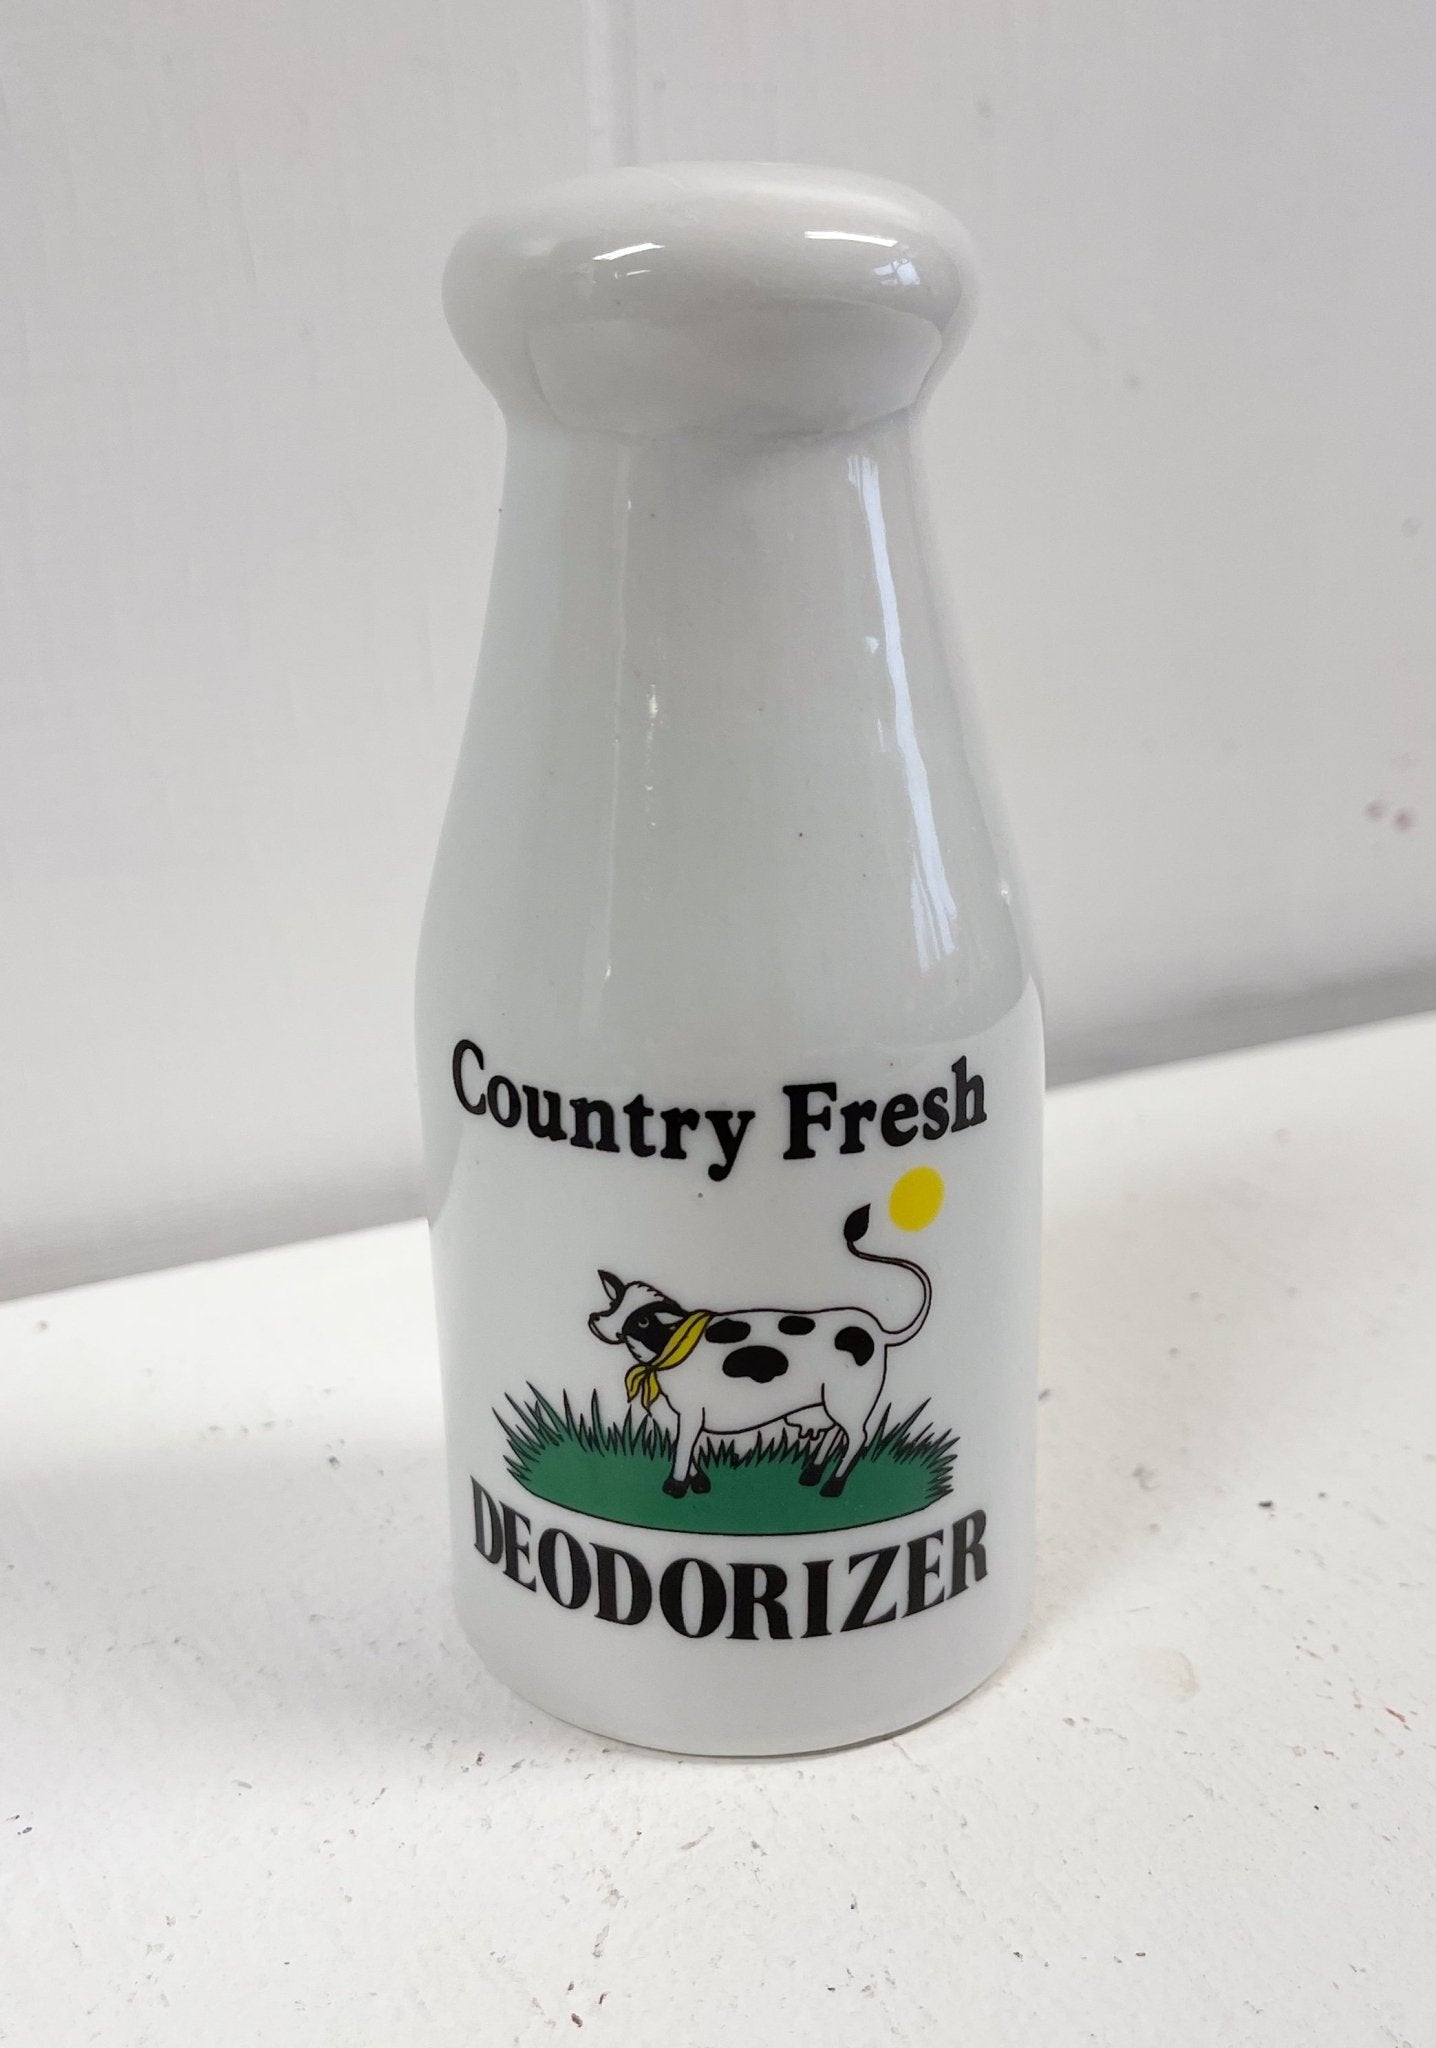 County Fresh Cow Pottery Refrigerator Deodorizer Bottle by Chadwick and Miller Inc-Chadwick and Miller Inc-Refrigerator Deodorizer Bottle-Stockton Farm